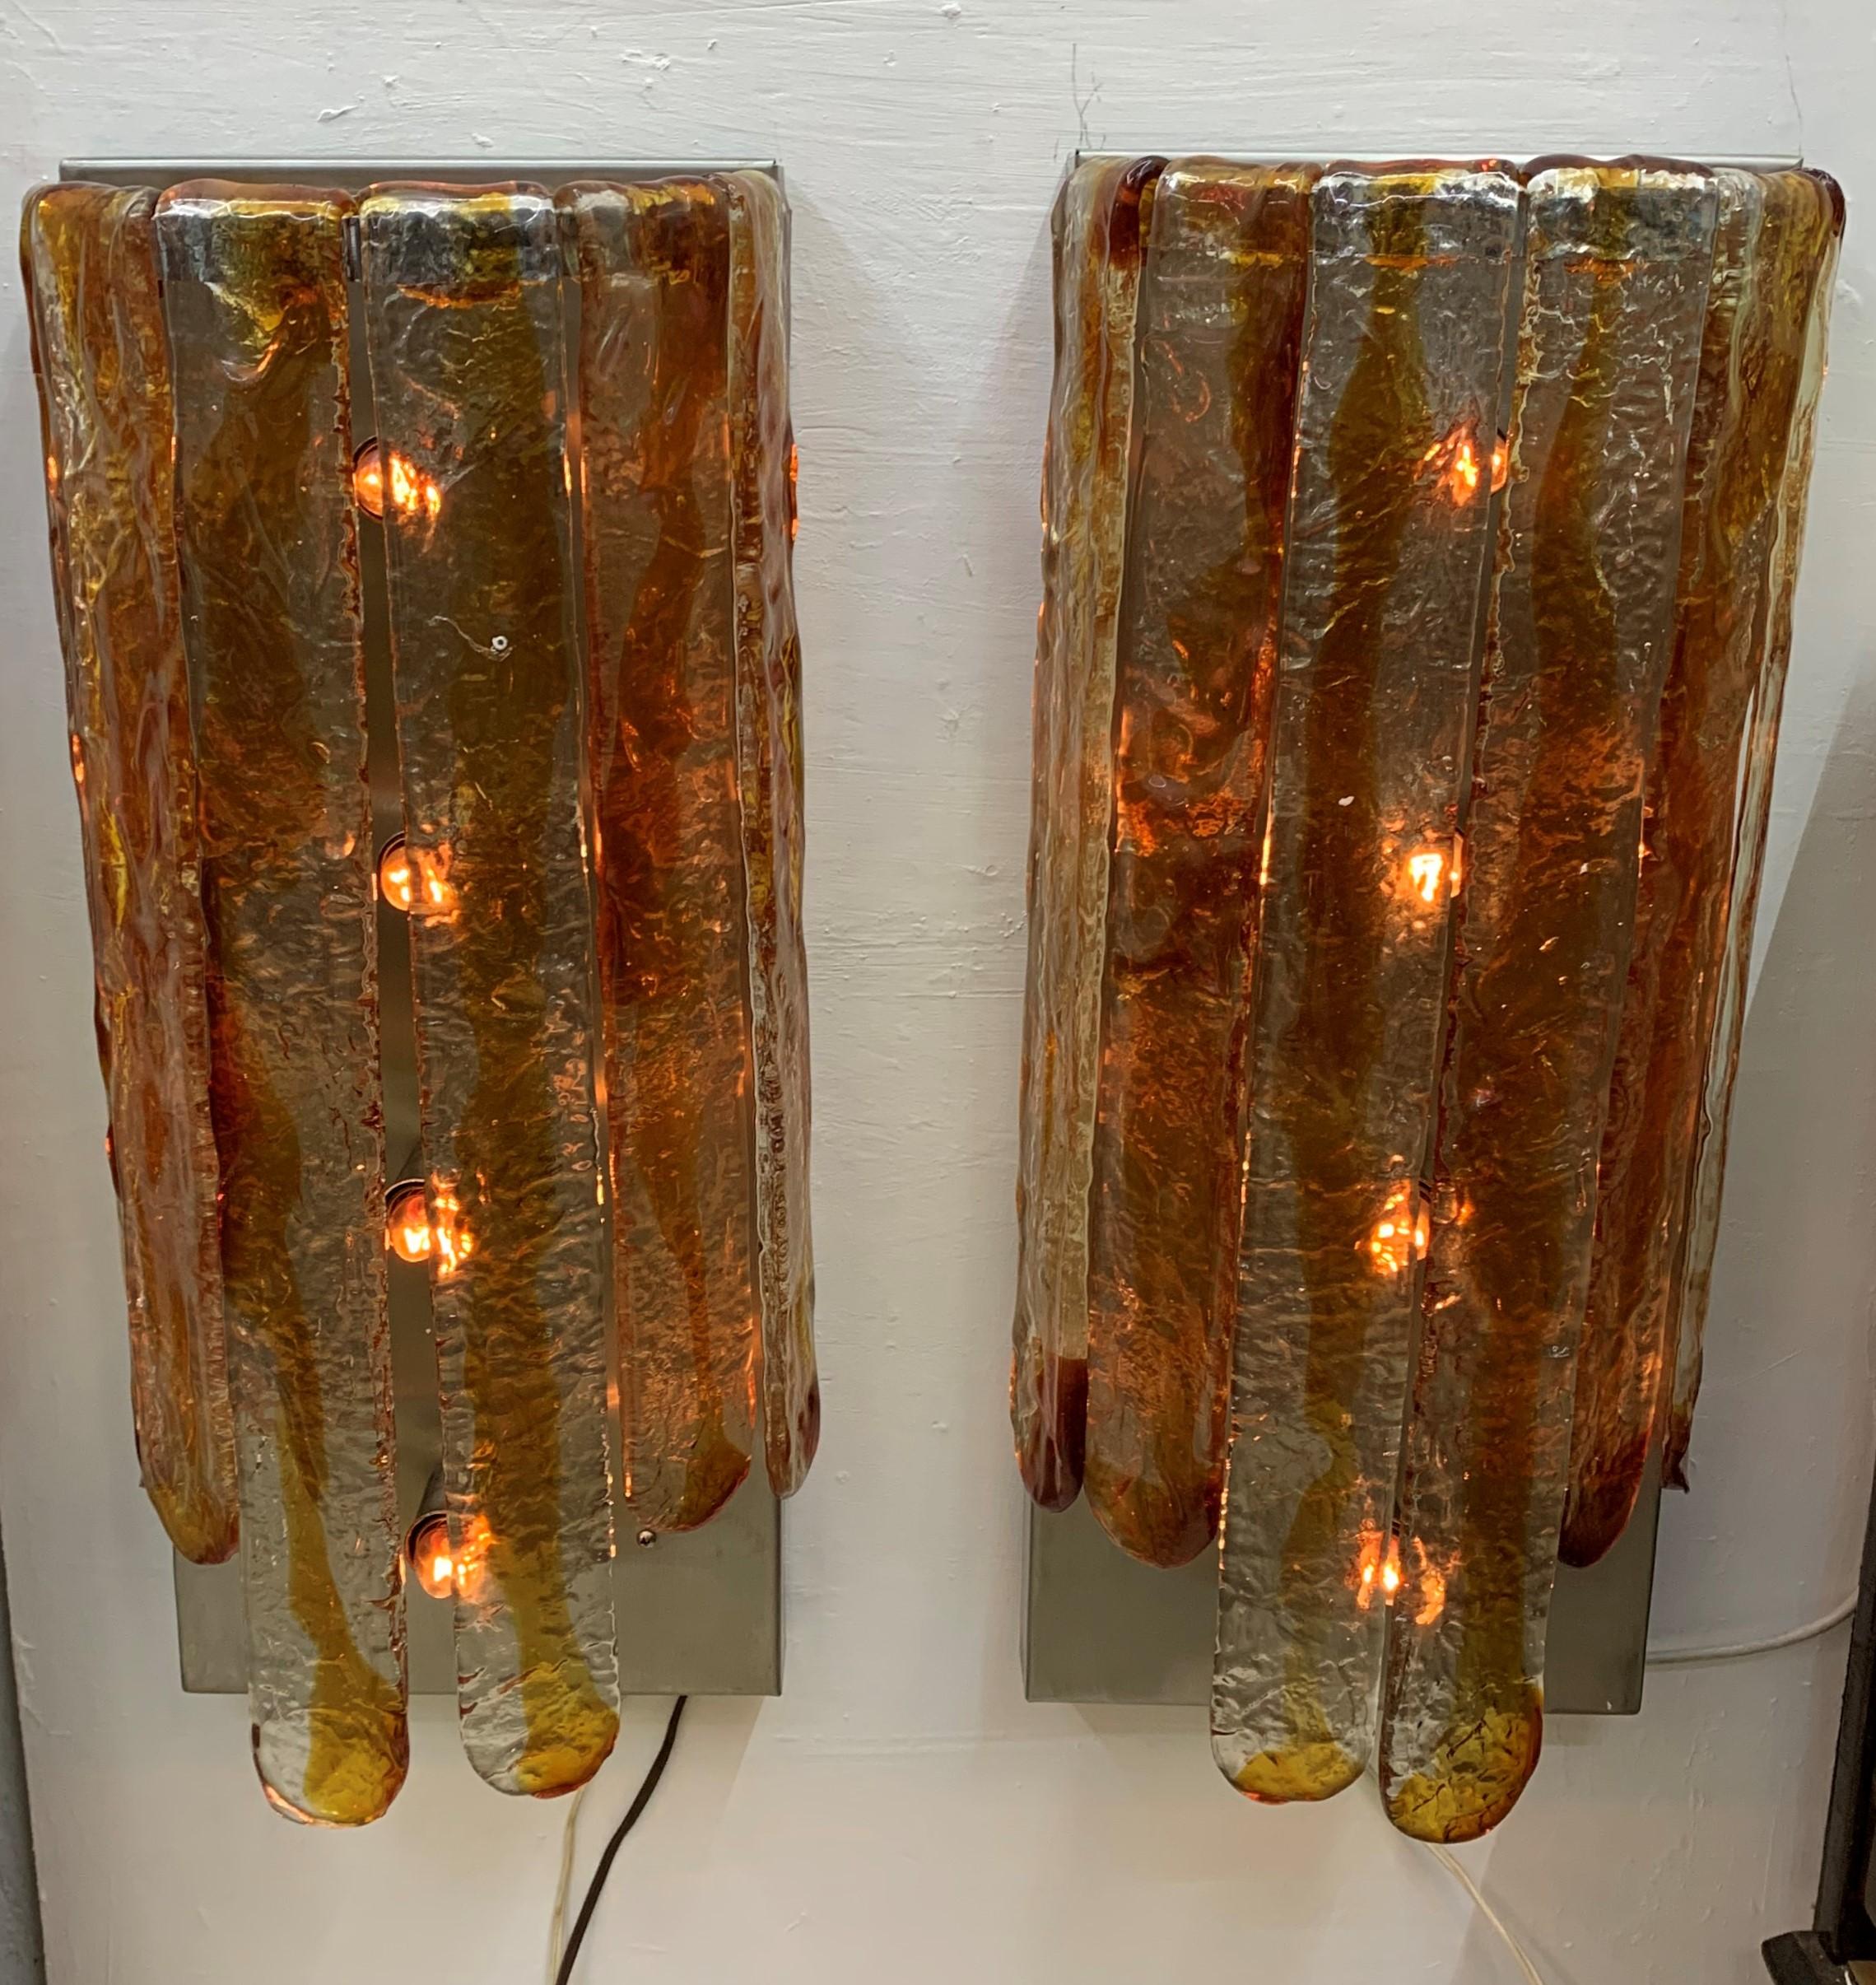 Pair of Mid-Century Modern sconces by Carlo Nason for Mazzega in clear and orange glass, consisting of two sizes of glass blades, and a 4-light stainless steel and wood hardware.
     